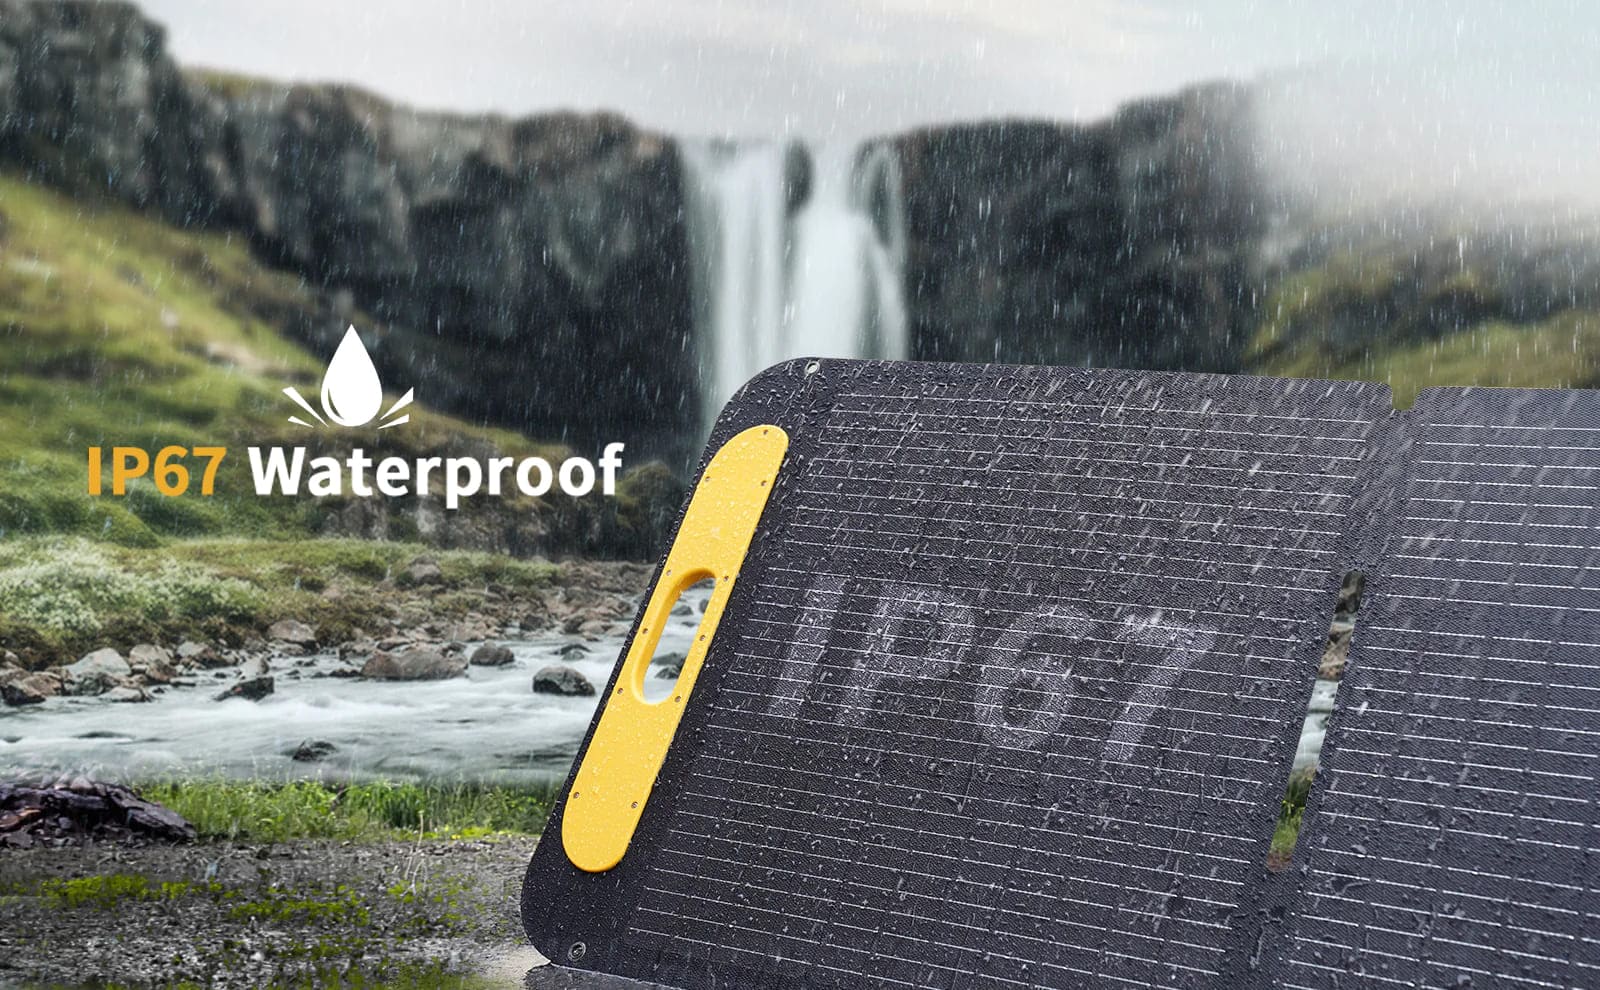 The IP67 waterproof ability also makes it a great choice for outdoor activities